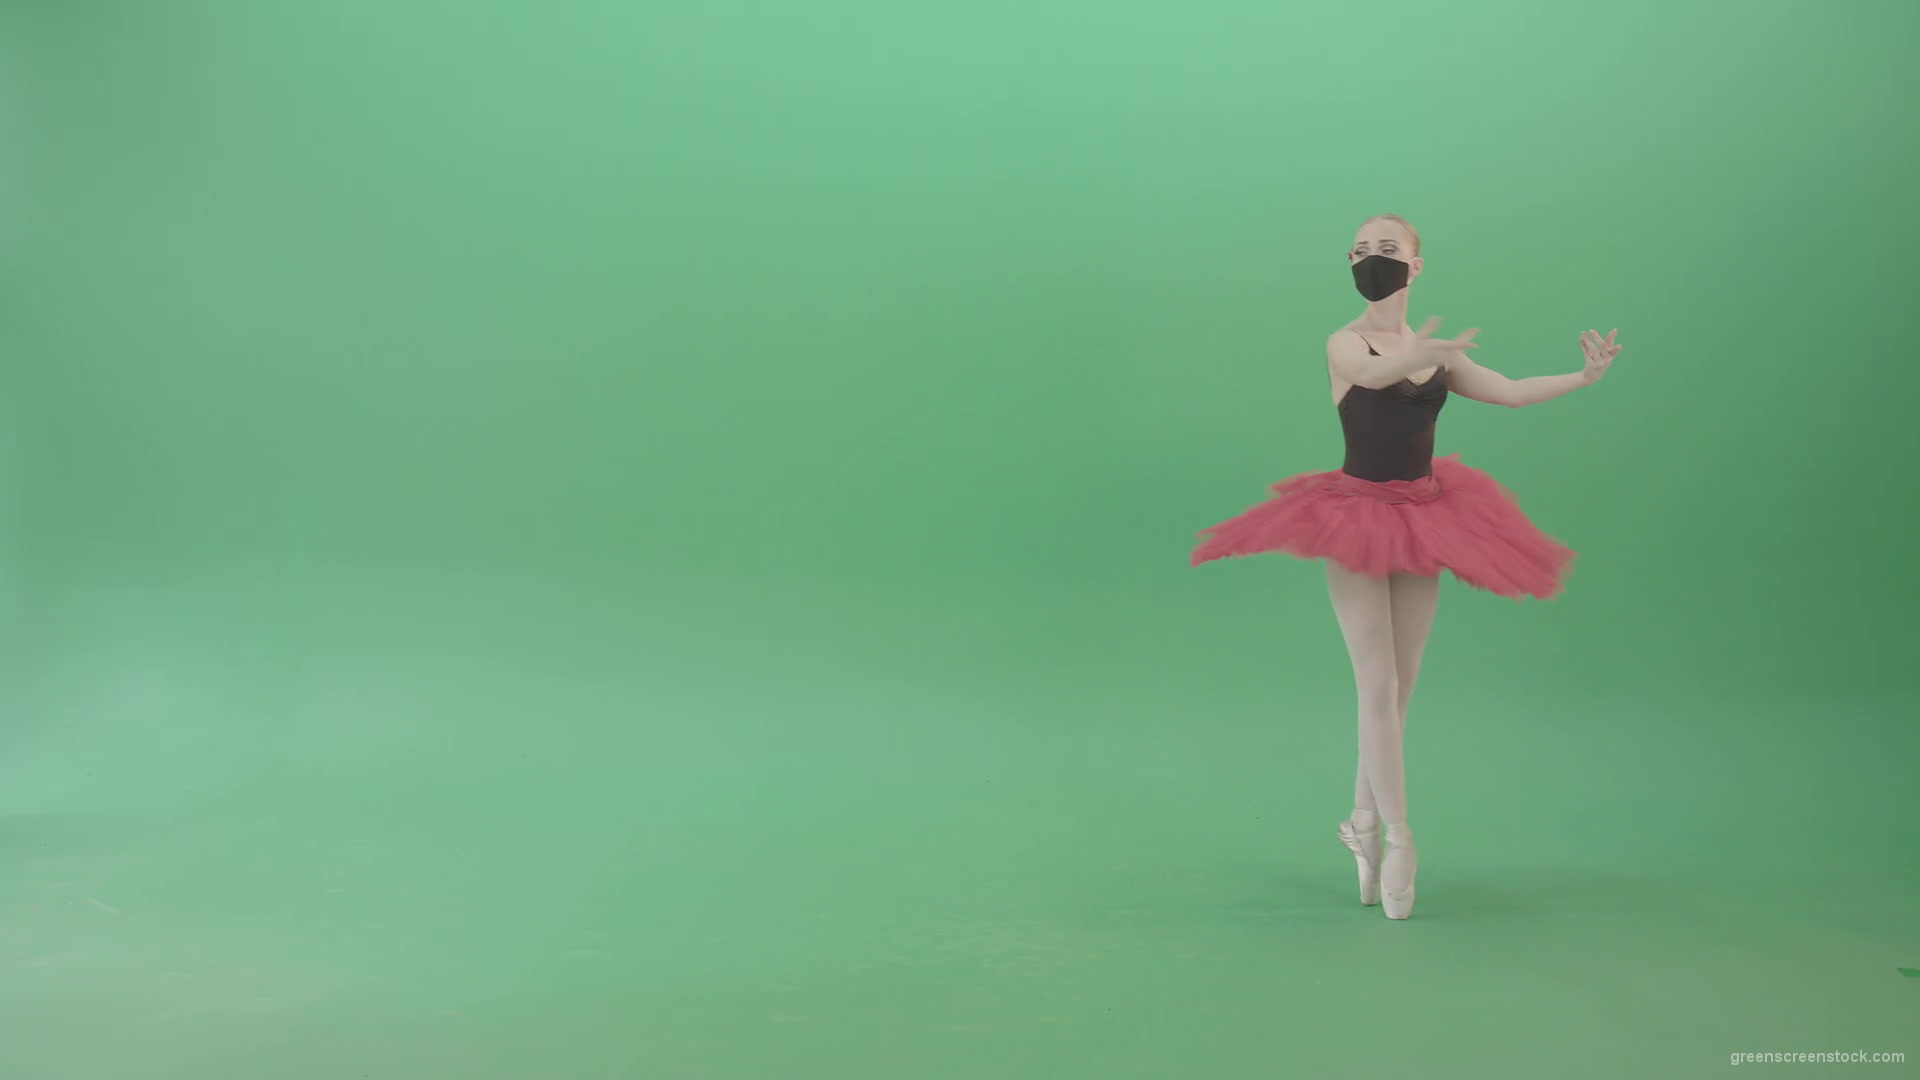 Tinny-Ballet-Dancing-Girl-Ballerina-in-red-black-dress-and-mask-welcome-people-for-awards-Green-Screen-Video-Footage-1920_002 Green Screen Stock